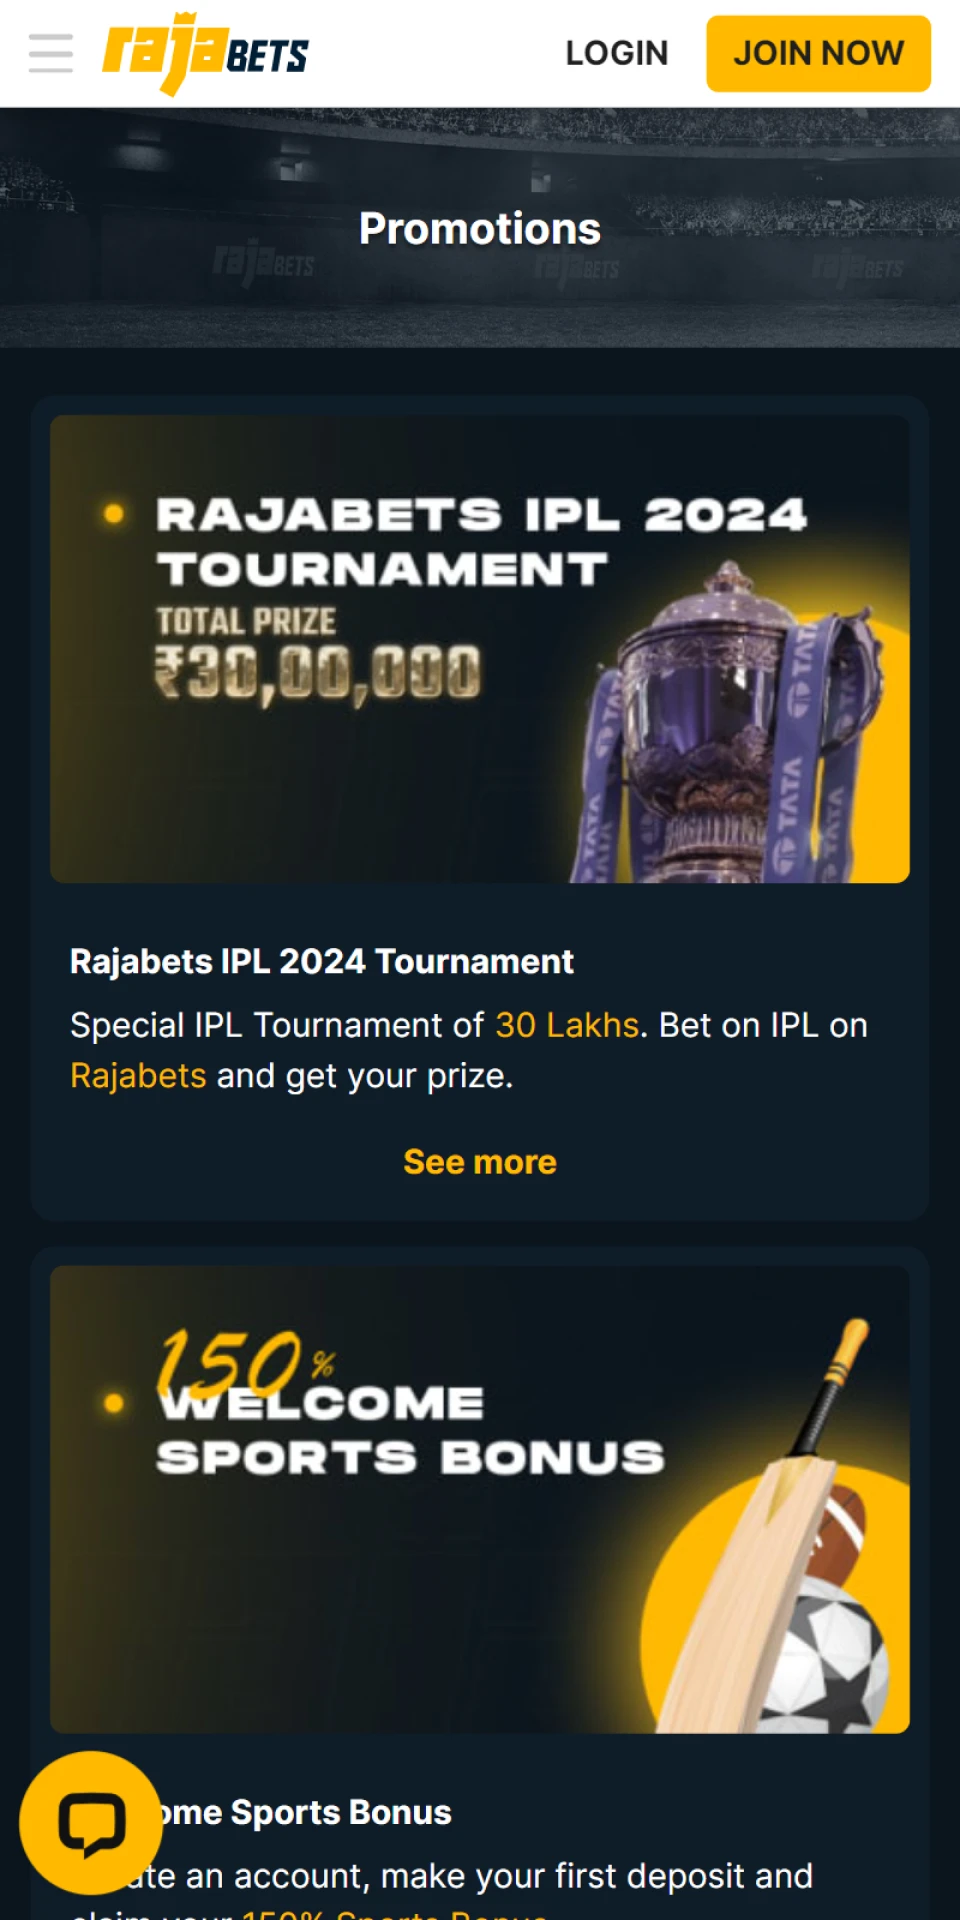 The Rajabets app has many different sports and casino bonuses.